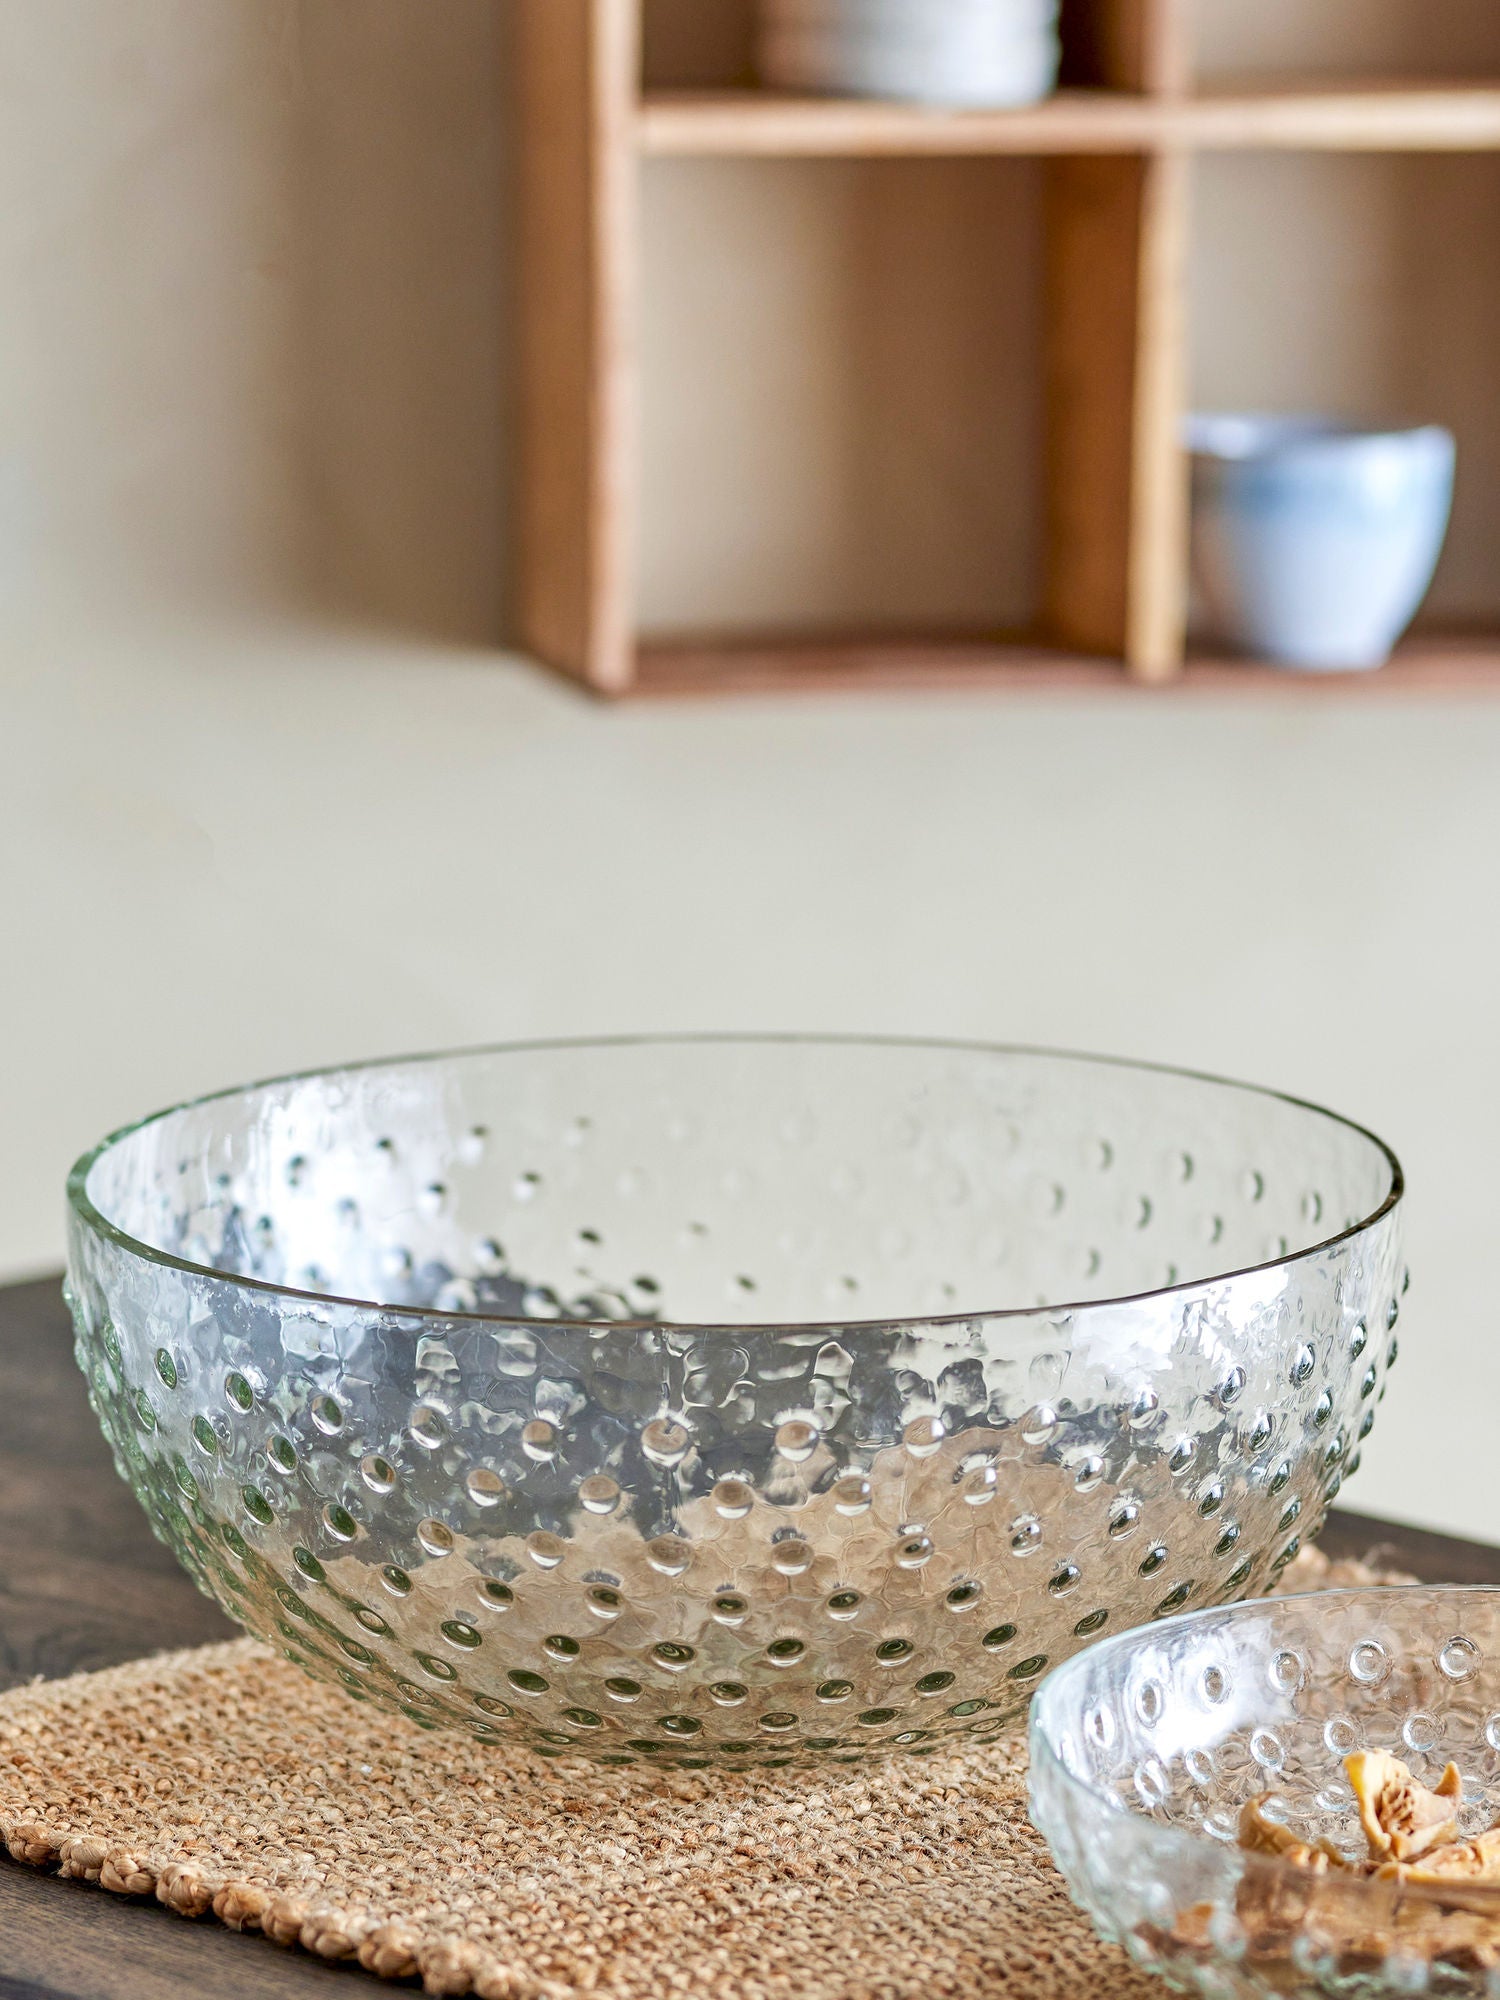 Bloomingville Justina Bowl, Clear, Recycled Glass